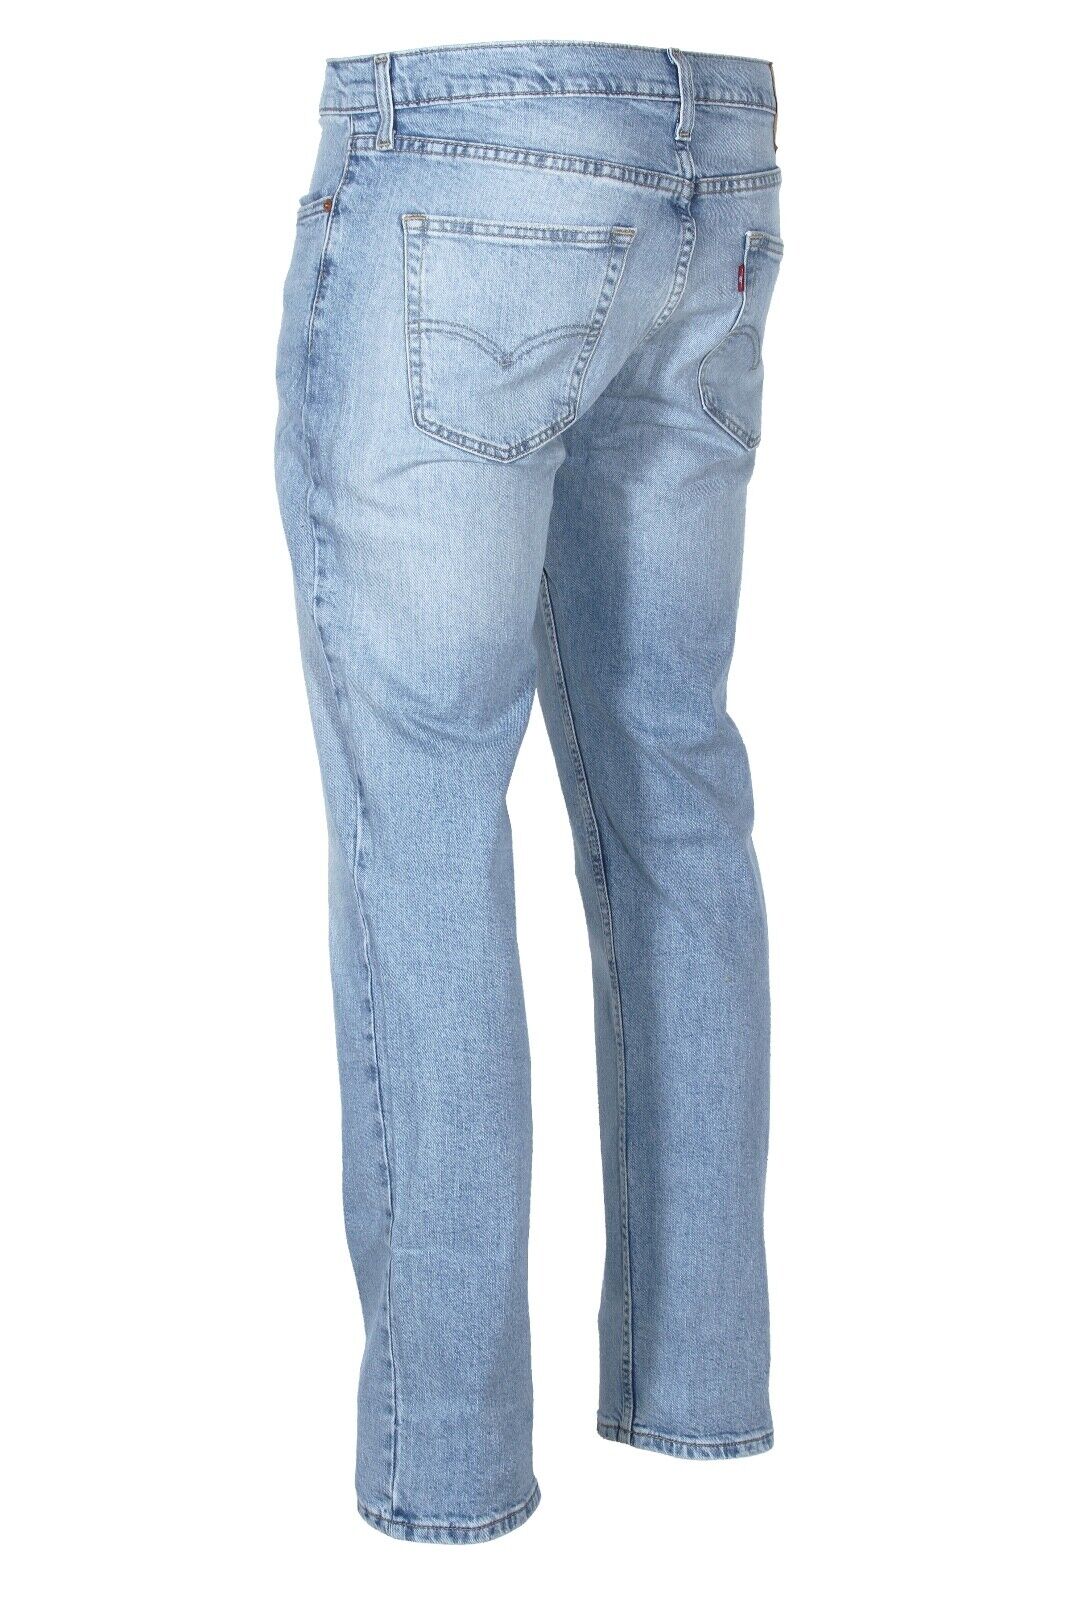 Levi’s 514 Straight Fit Men's Jeans Wash: Only Wish Adv Style# 00514-1867